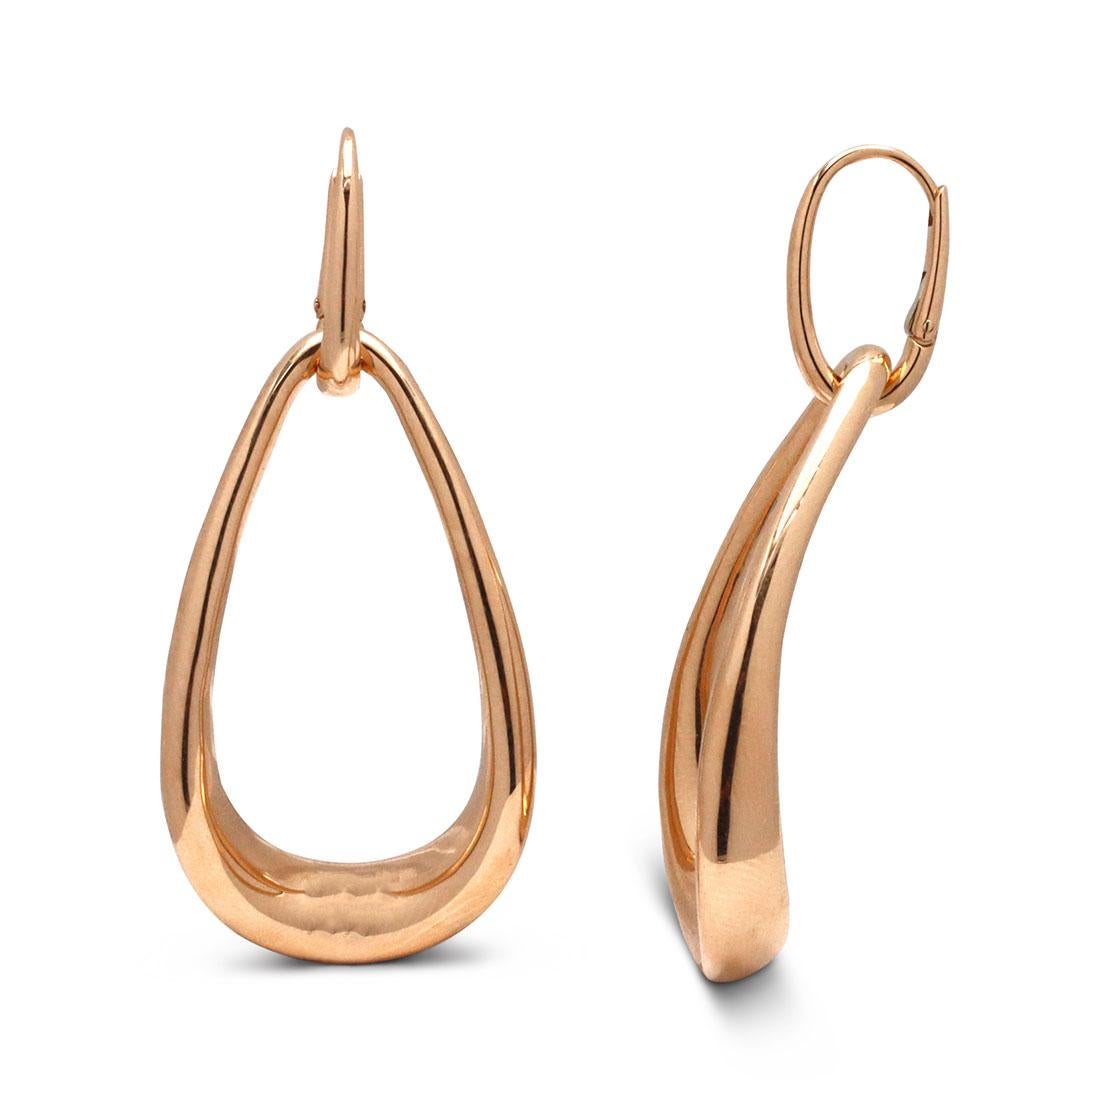 Authentic Pomellato 'Fantina' earrings crafted in high-polished 18 karat rose gold. Inspired by Pomellato's equestrian origins, the chic, organic shape of these earrings is a new twist on an old classic. The earrings measure 54mm in length and 24.1